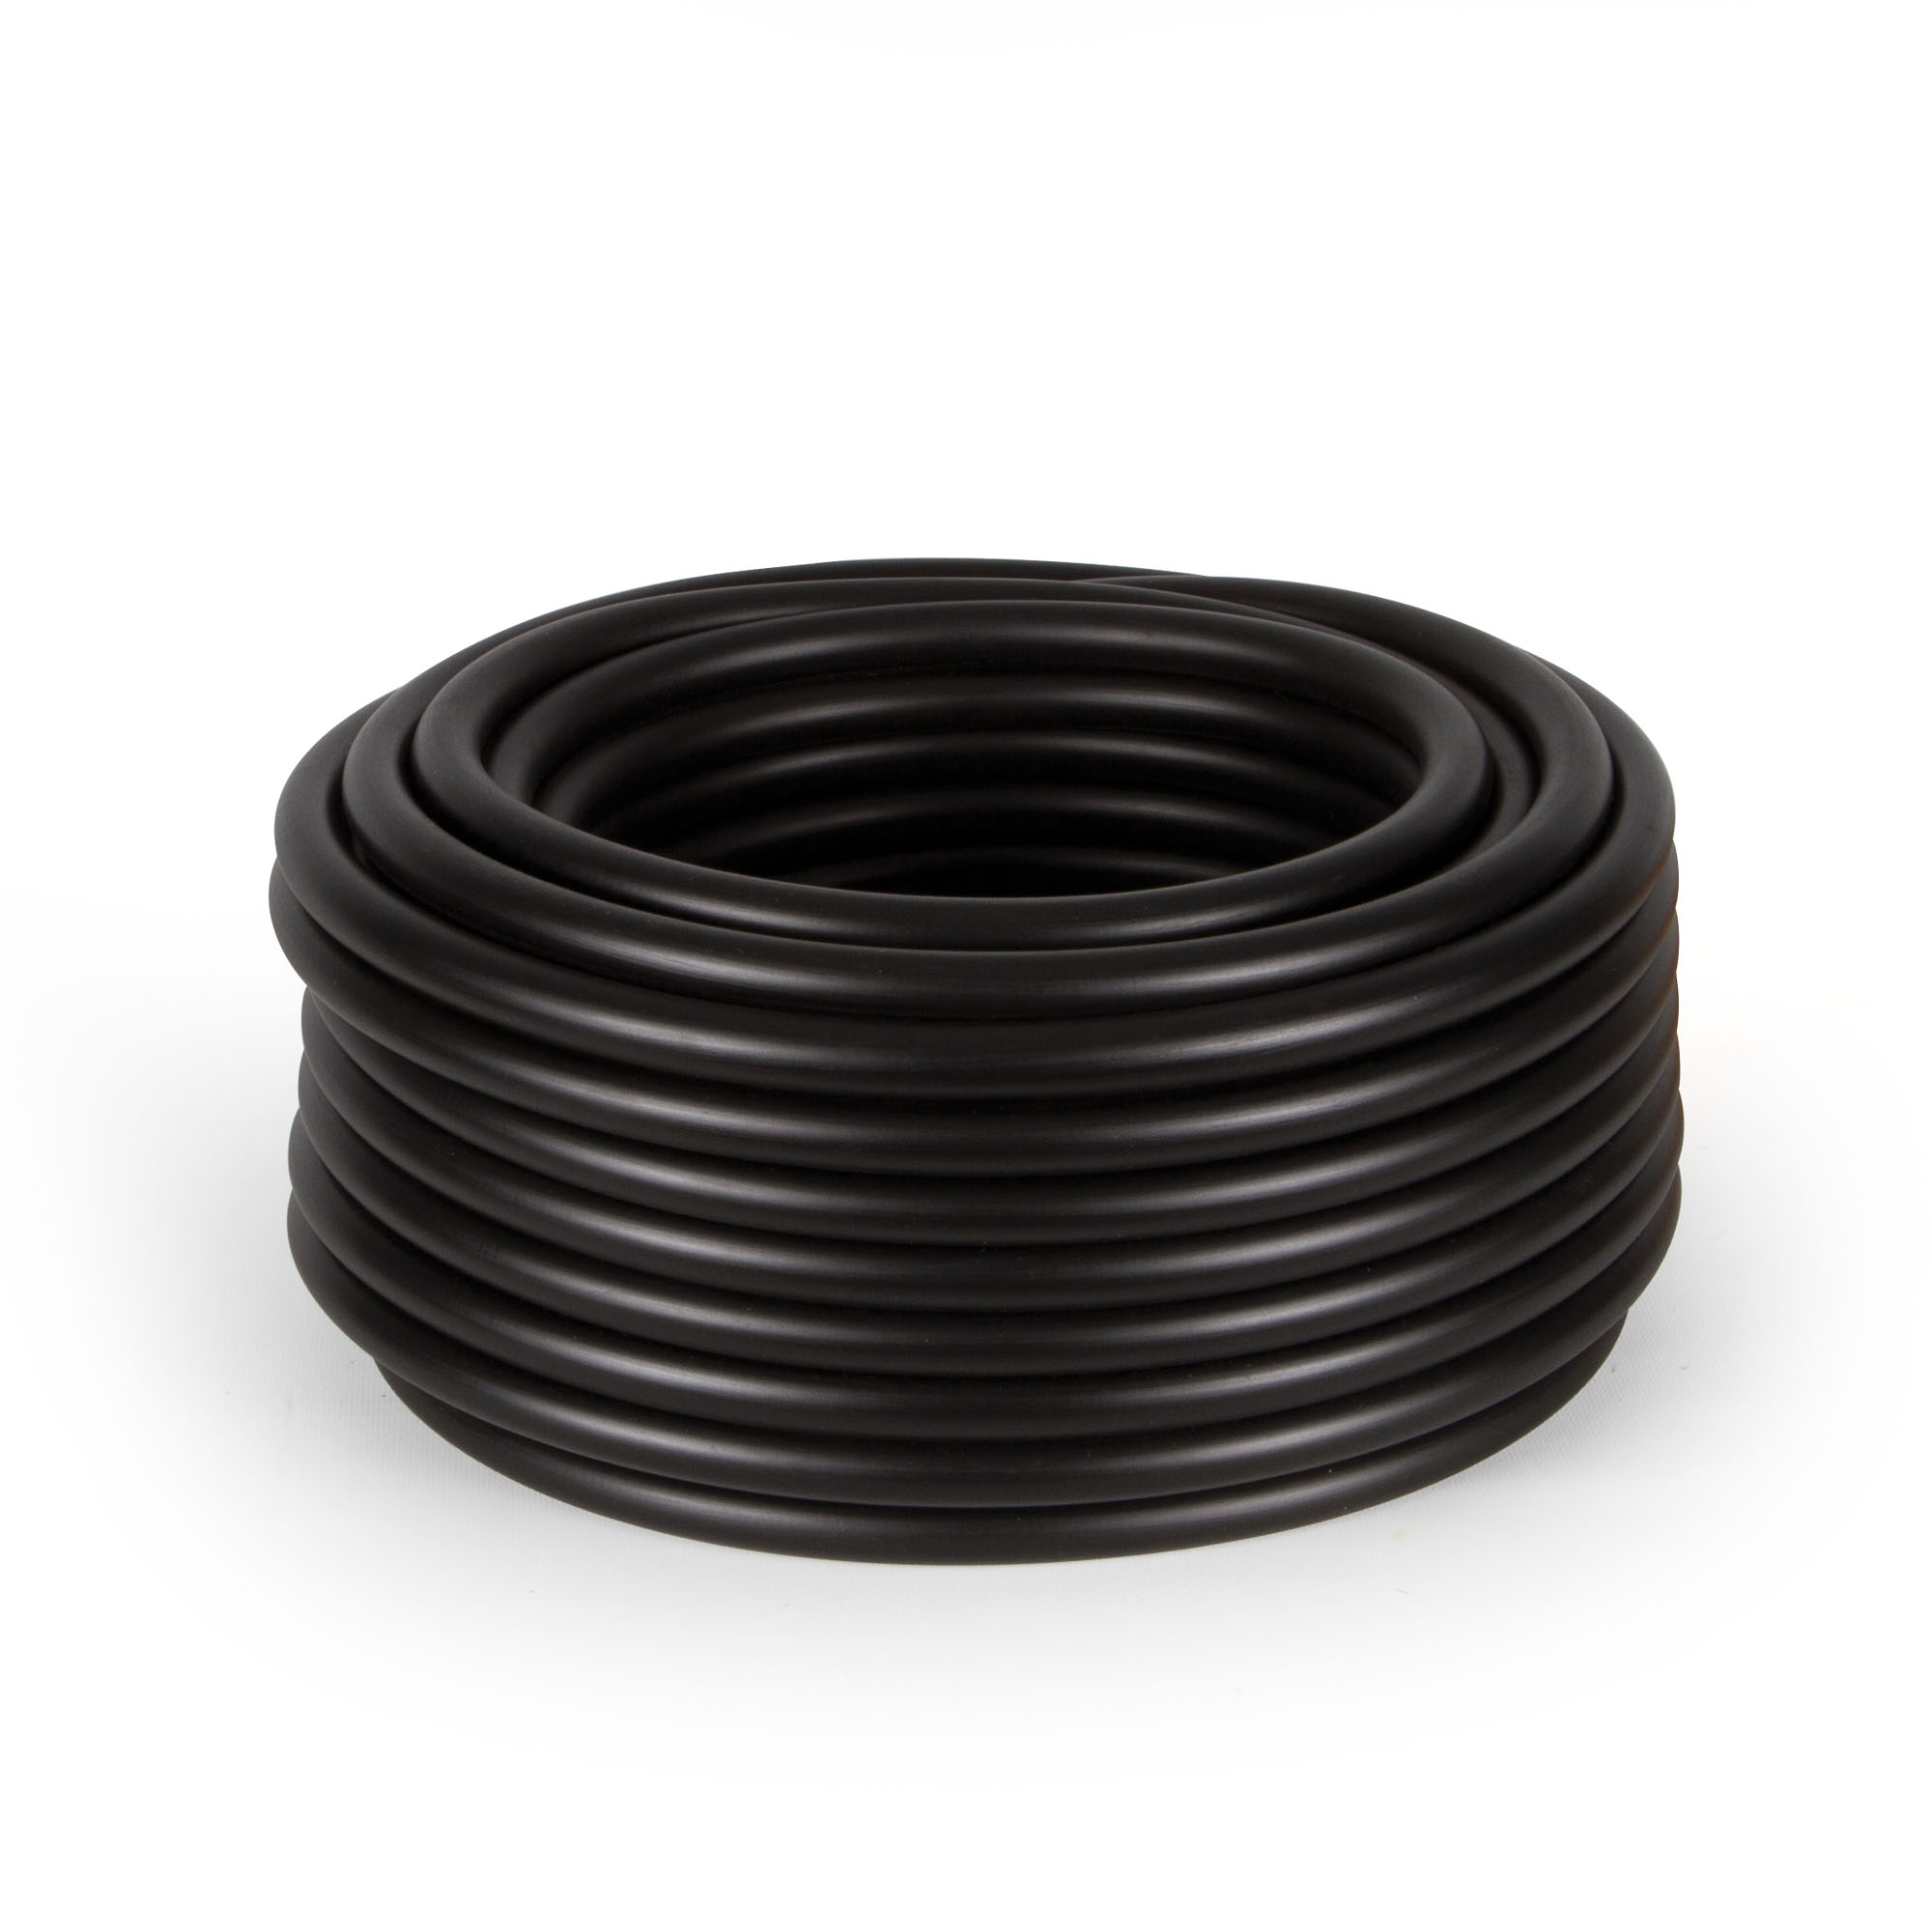 WEIGHTED TUBING - ⅜" @ 100'